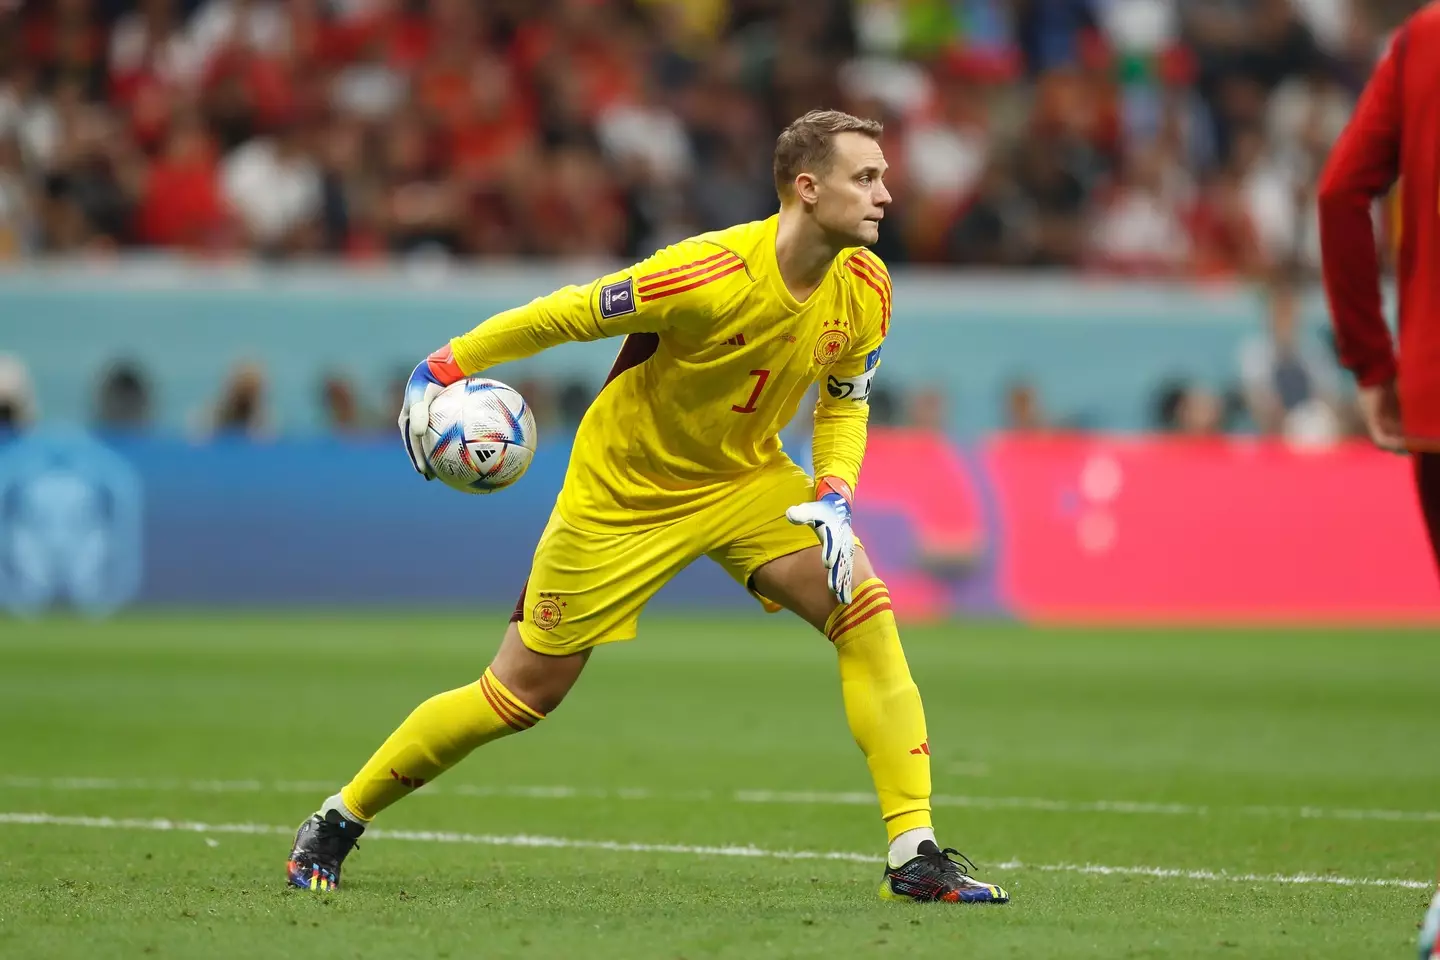 Neuer in action for Germany. (Image